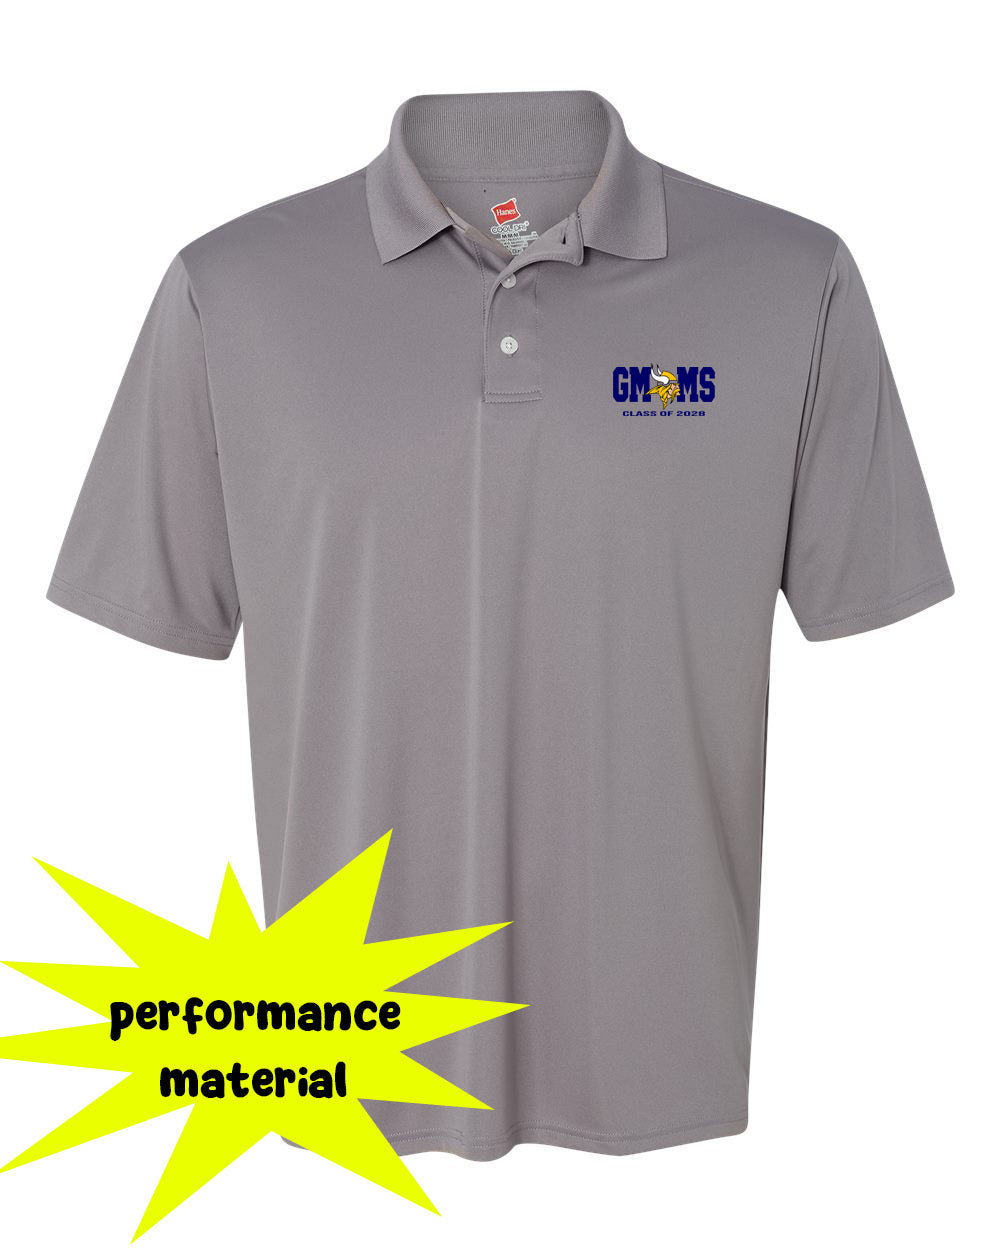 Glen Meadow Class of 2028 Performance Material Polo T-Shirt